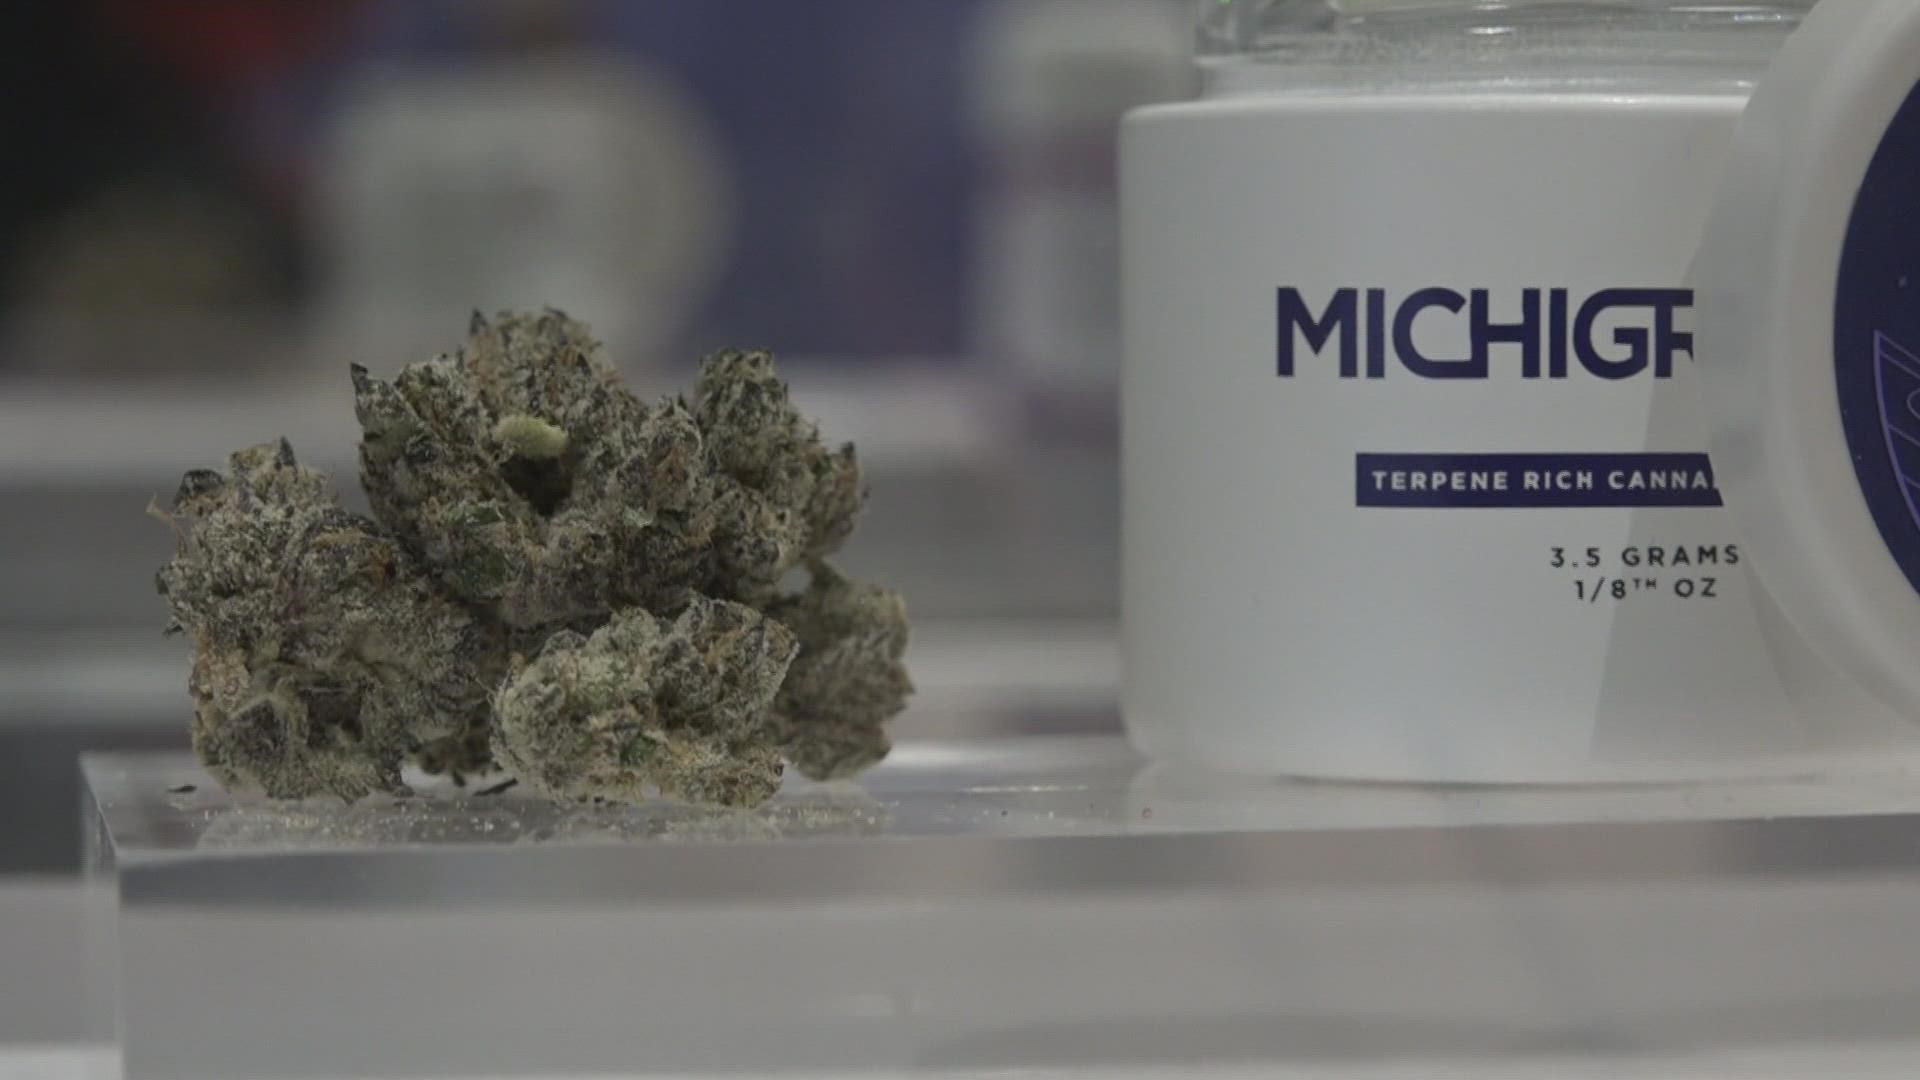 A proposal to allow marijuana events at two public spaces in Muskegon will go before the city commission Tuesday.